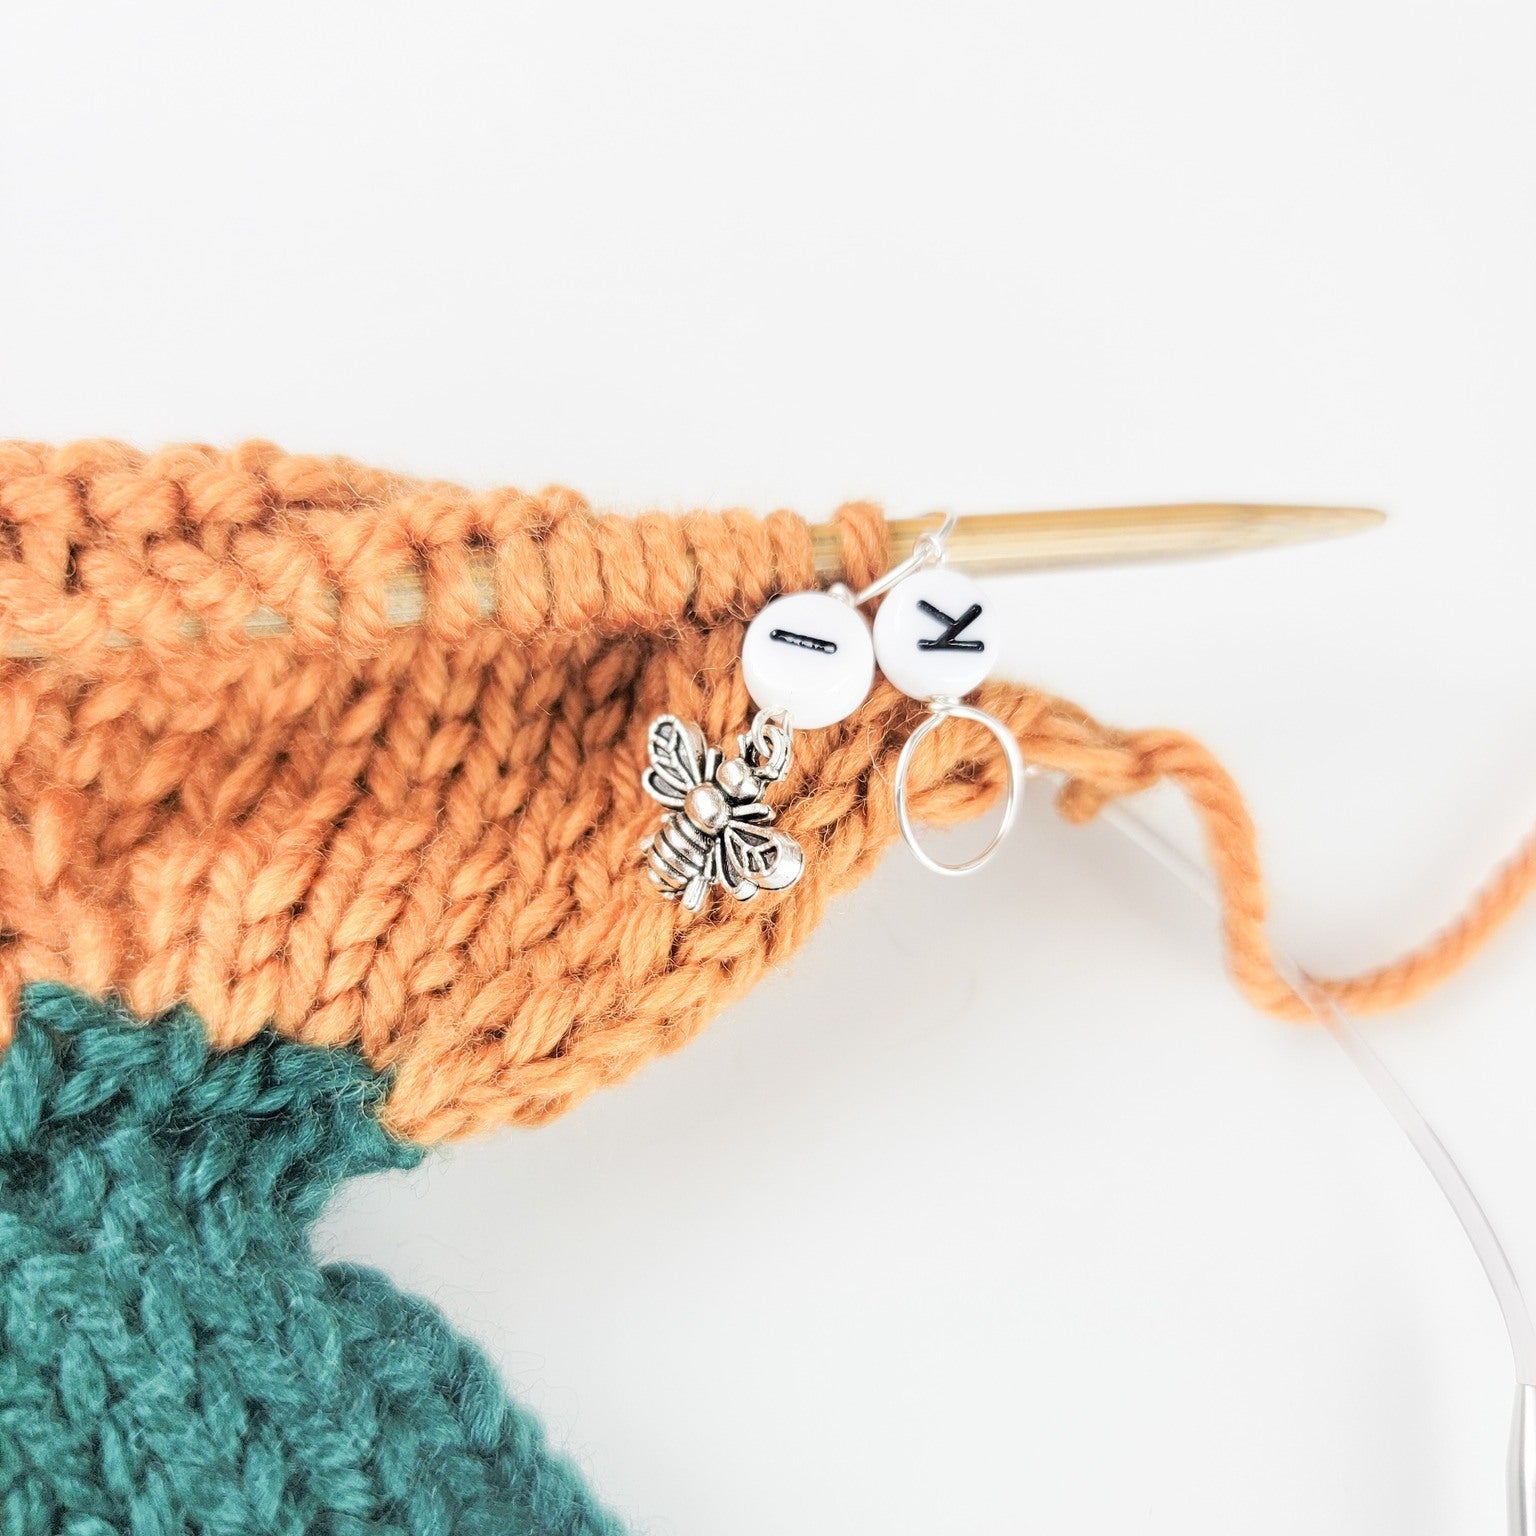 Hand made stitch markers for knitting – The Knitting Times